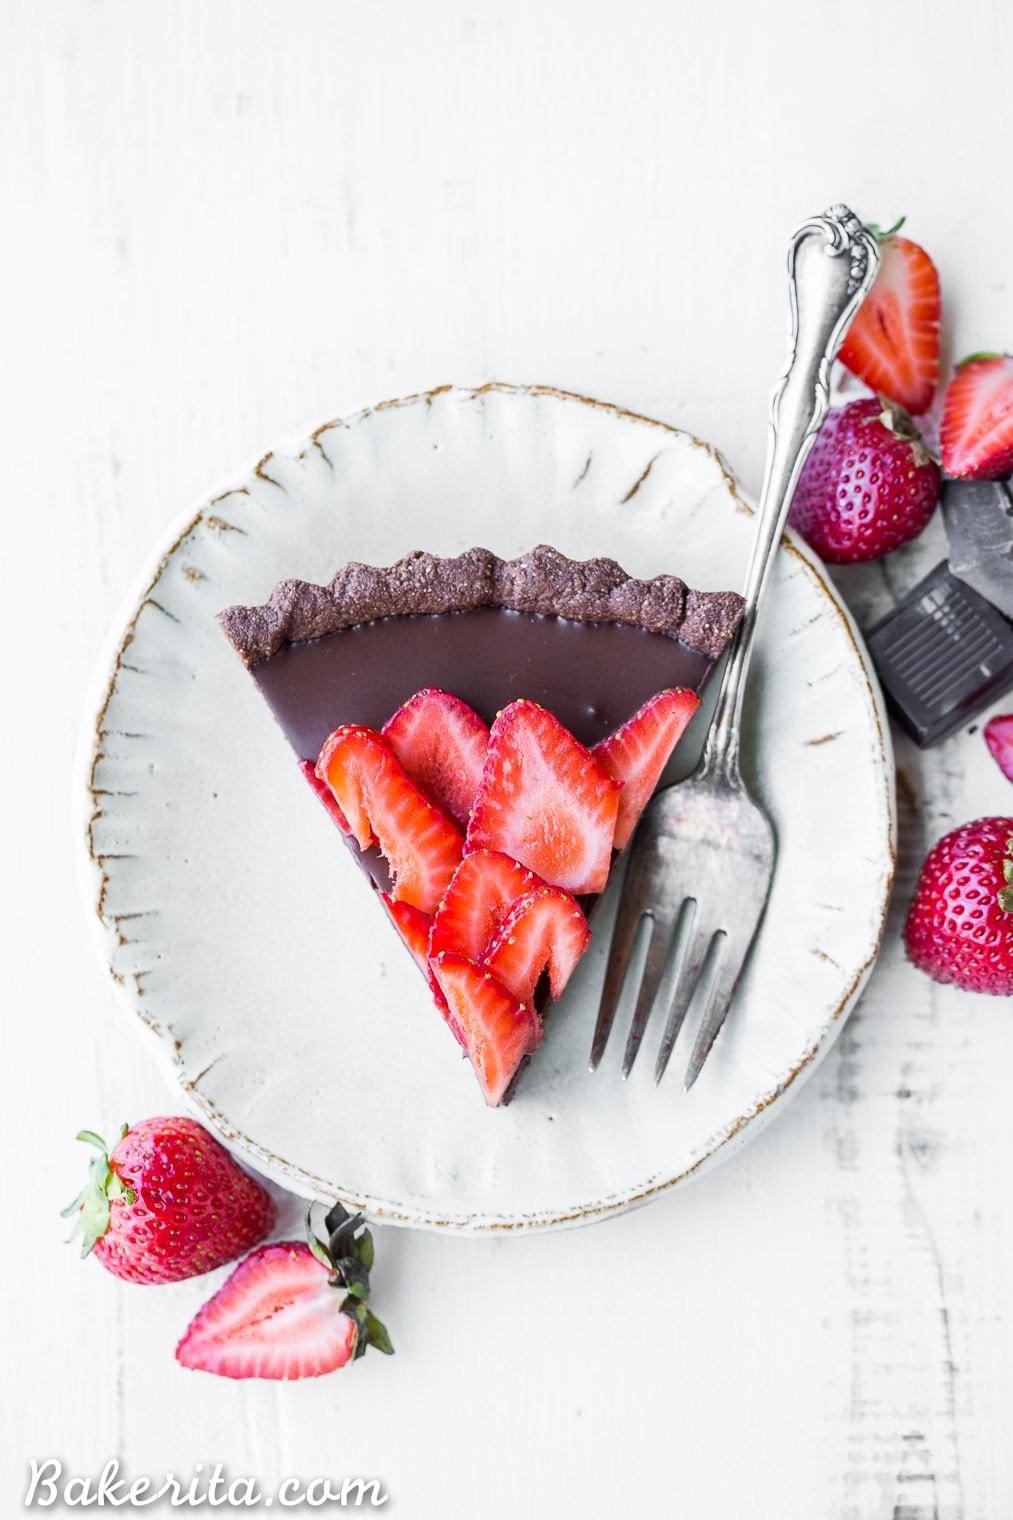 This Strawberry Chocolate Tart is filled with vegan chocolate ganache and topped with fresh strawberries, all in a chocolate crust. Slice into this easy and delicious gluten-free, Paleo, and vegan dessert.